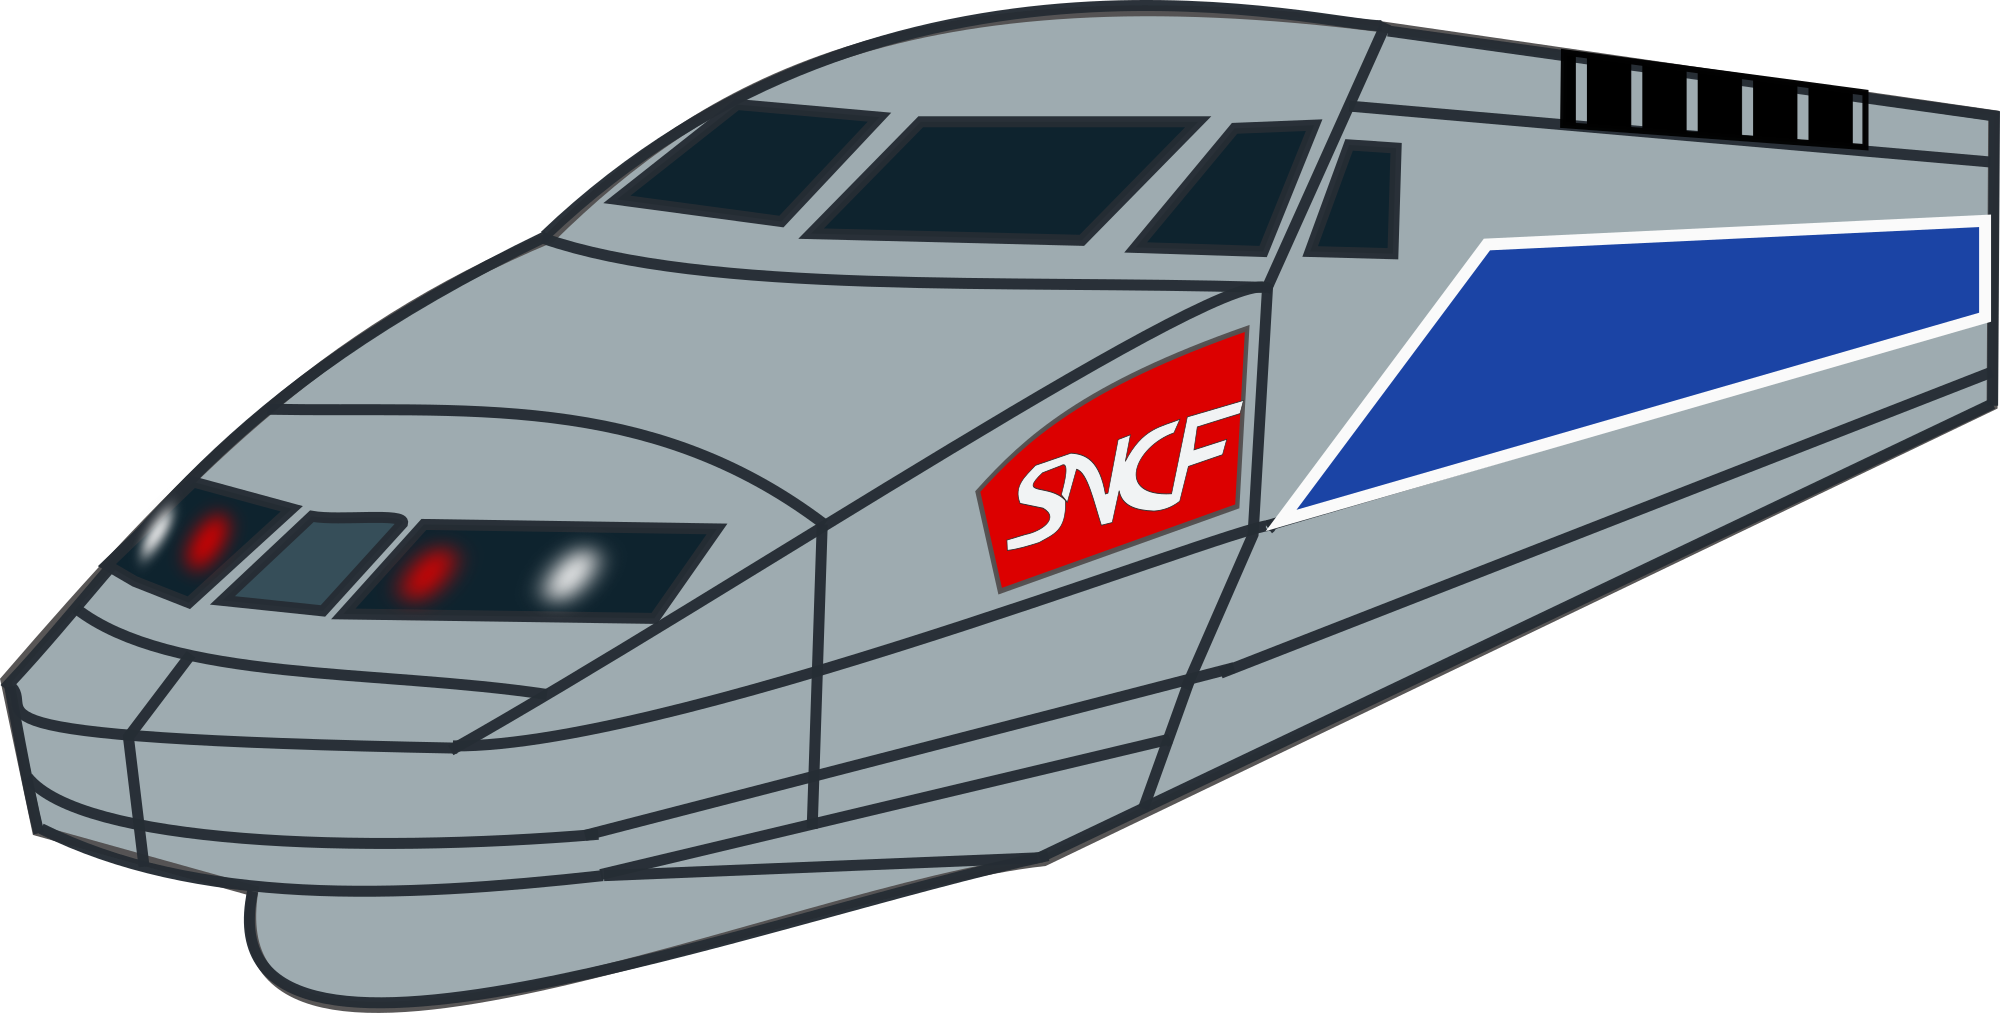 Free bullet train clipart clipart and vector image